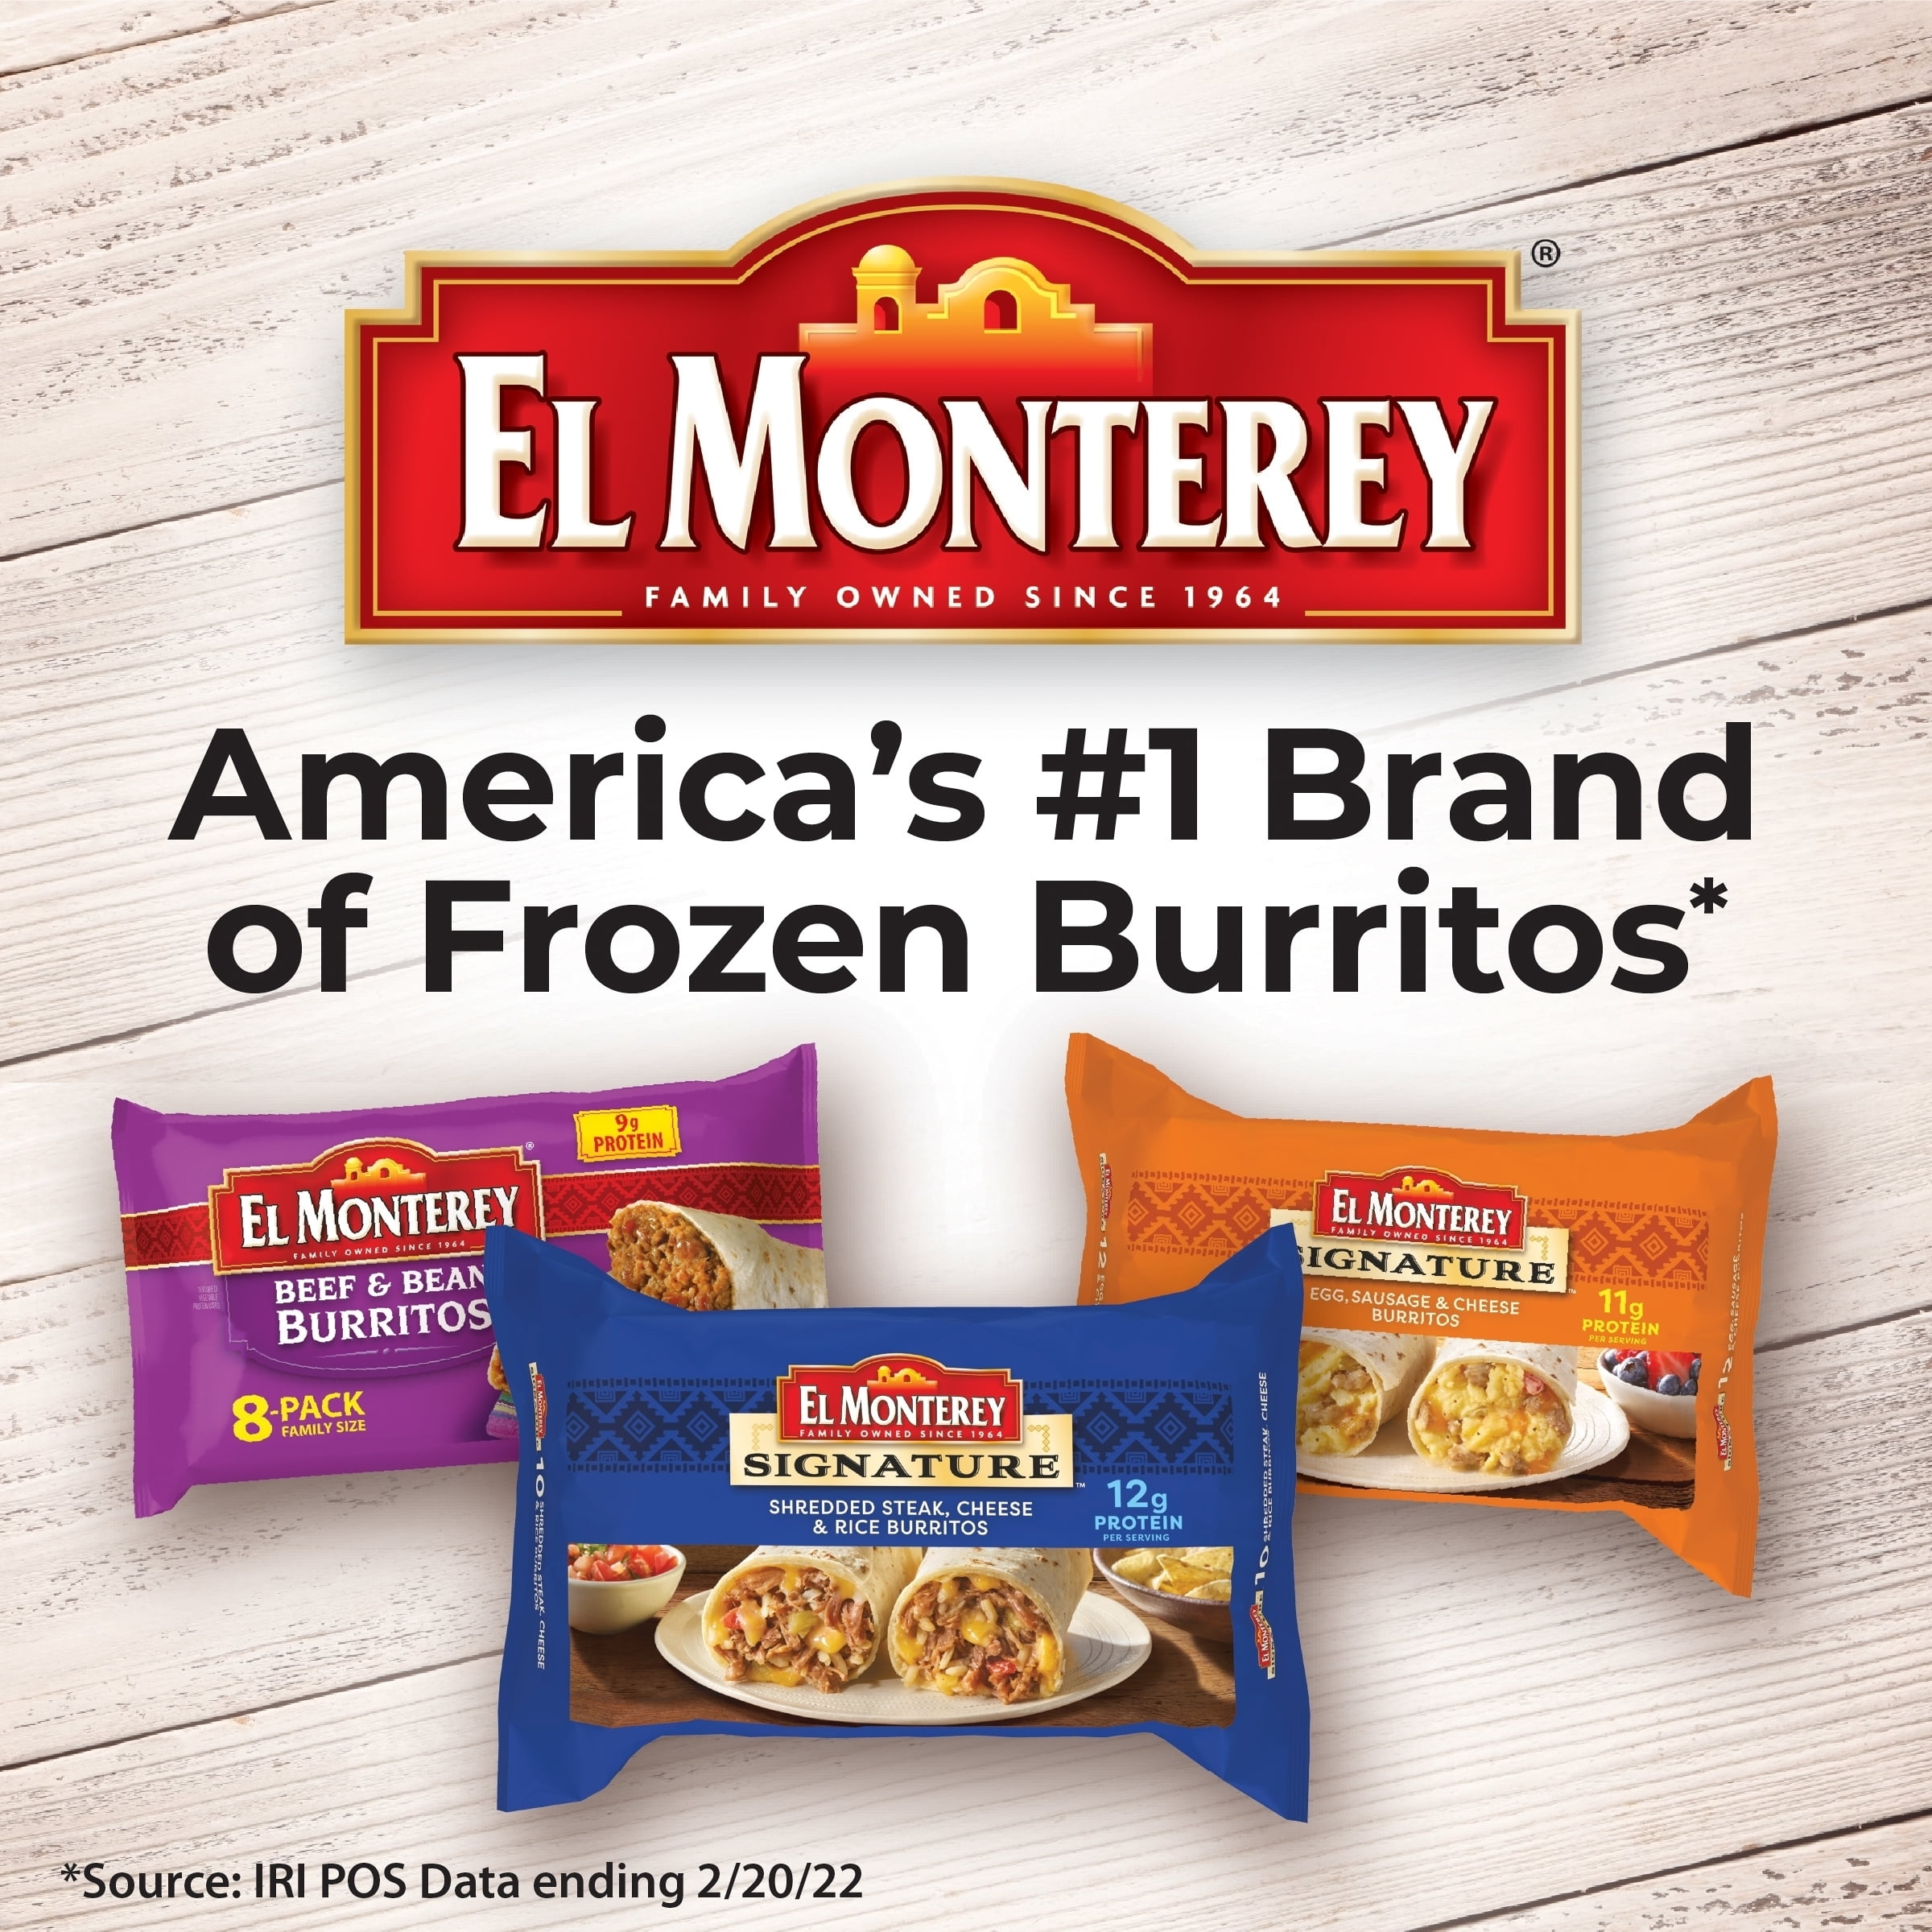 El Monterey Signature Chicken & Monterey Jack Cheese Chimichangas, Delivery Near You